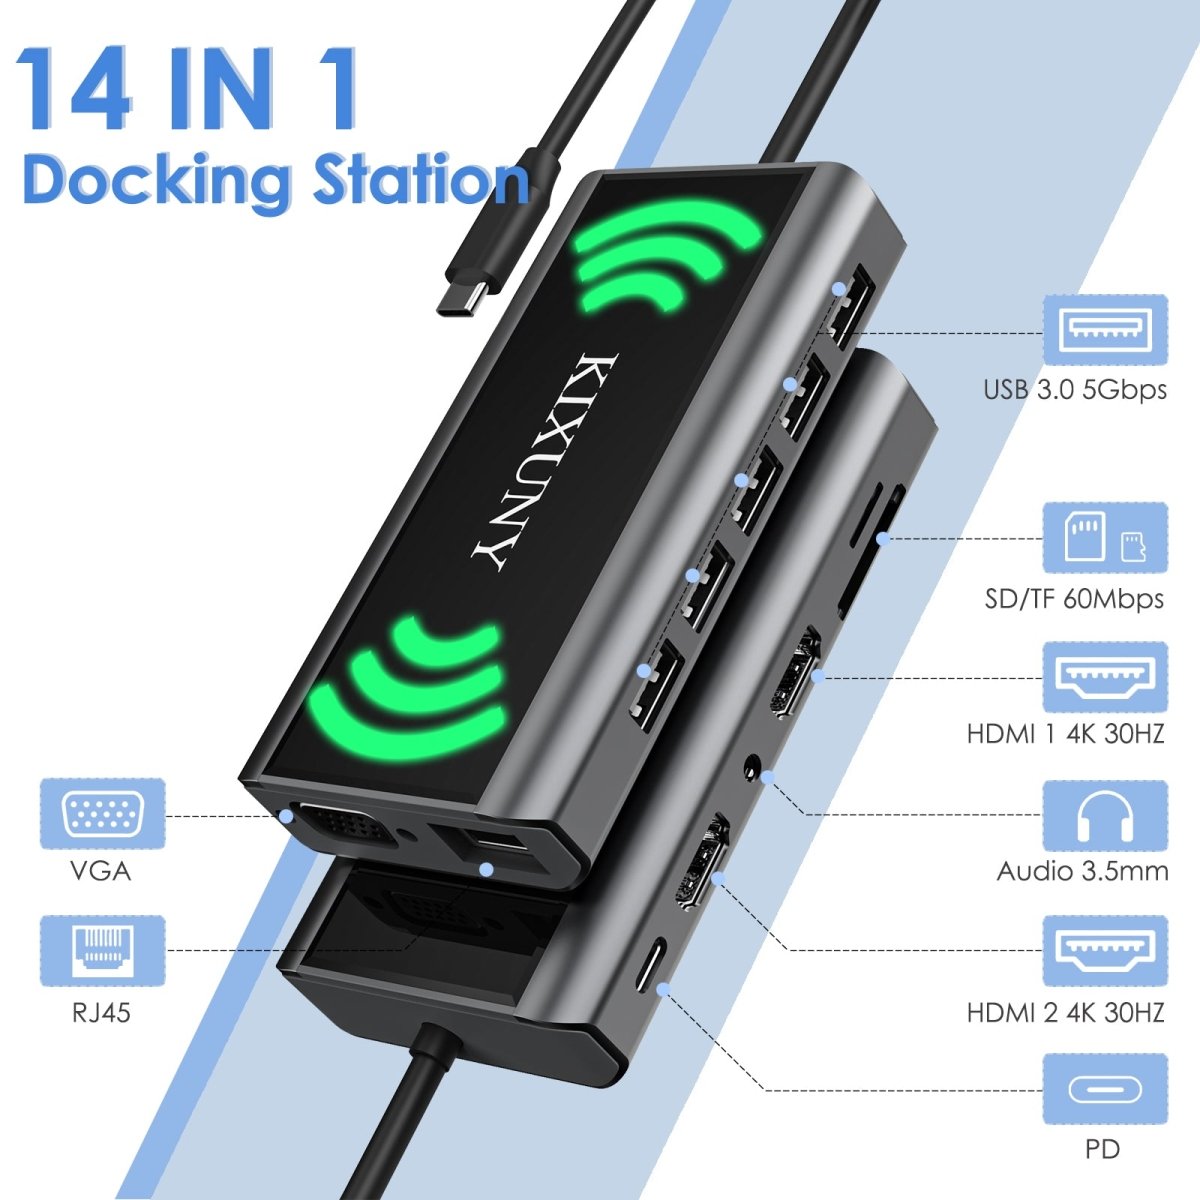 Kixuny USB C Docking Station Dual Monitor, 14-in-1 Triple Display Laptop Docking Station with Wireless Charging+2 HDMI 4K+VGA+Ethernet+100W PD+SD/TF+Audio+5 USB Work for Dell/HP/Lenovo Computer - Linford Office:Printer Ink & Toner Cartridge